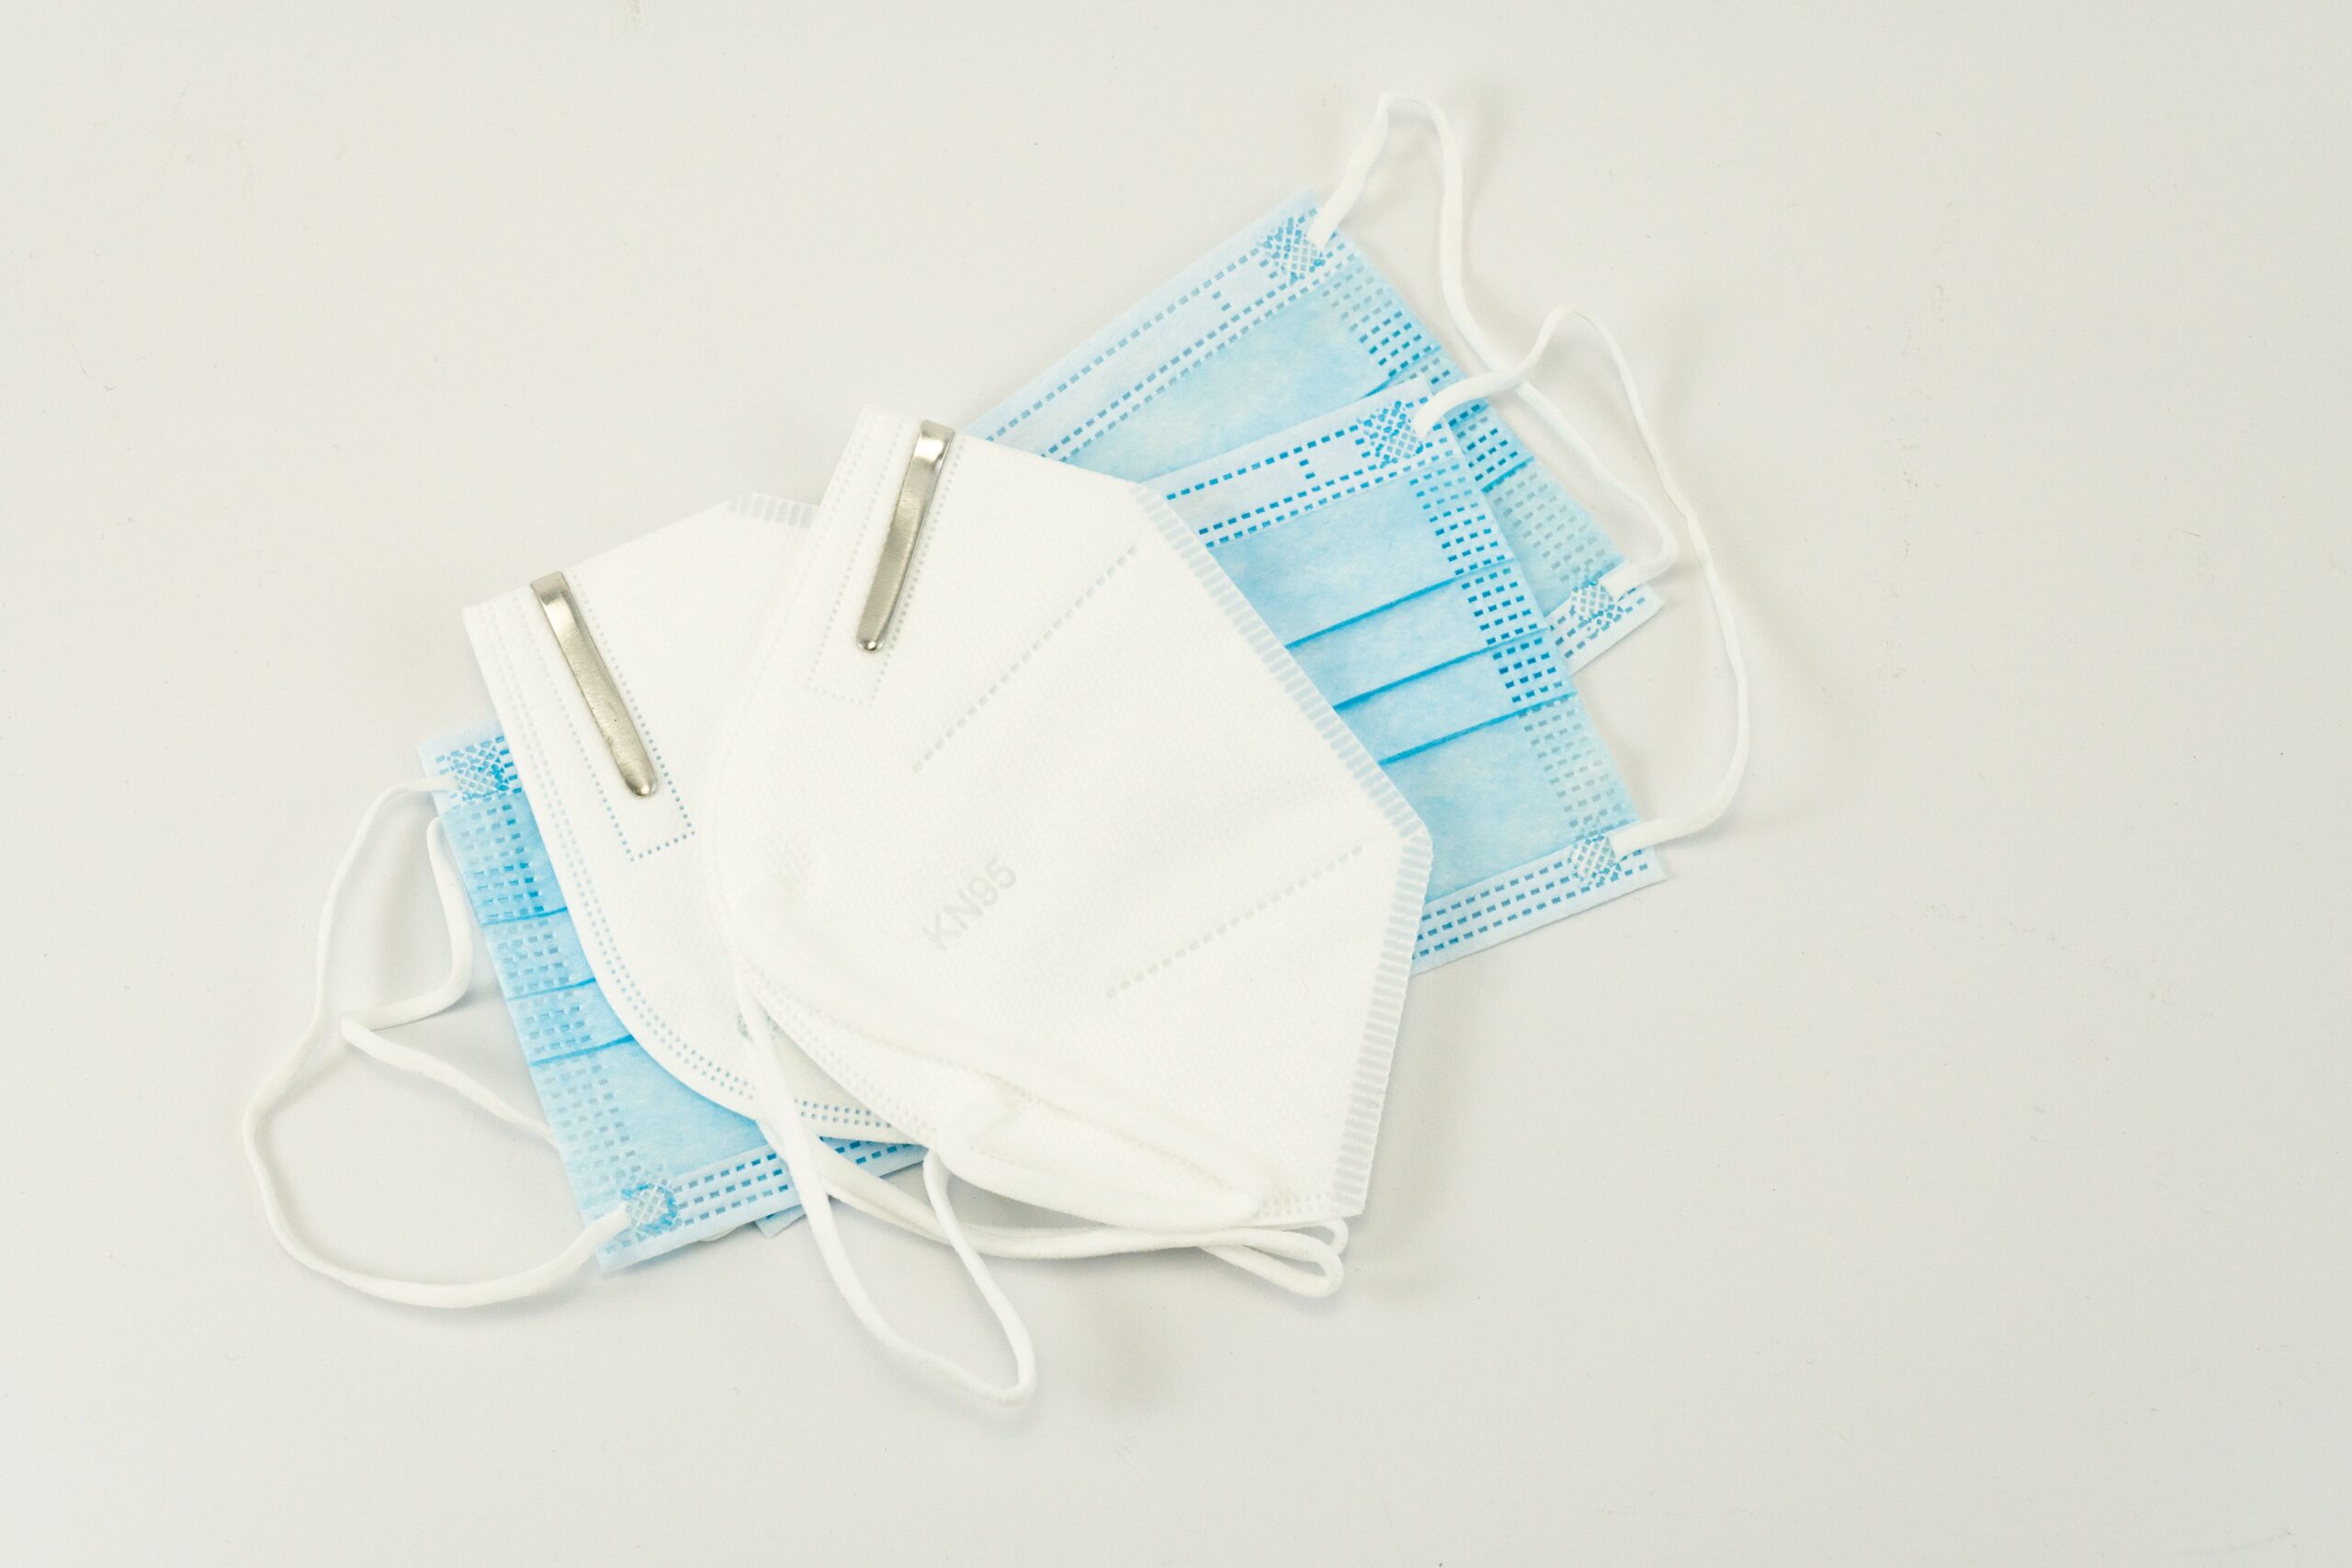 3 face masks against a white background: 2 surgical face mask and 1 N95 mask.